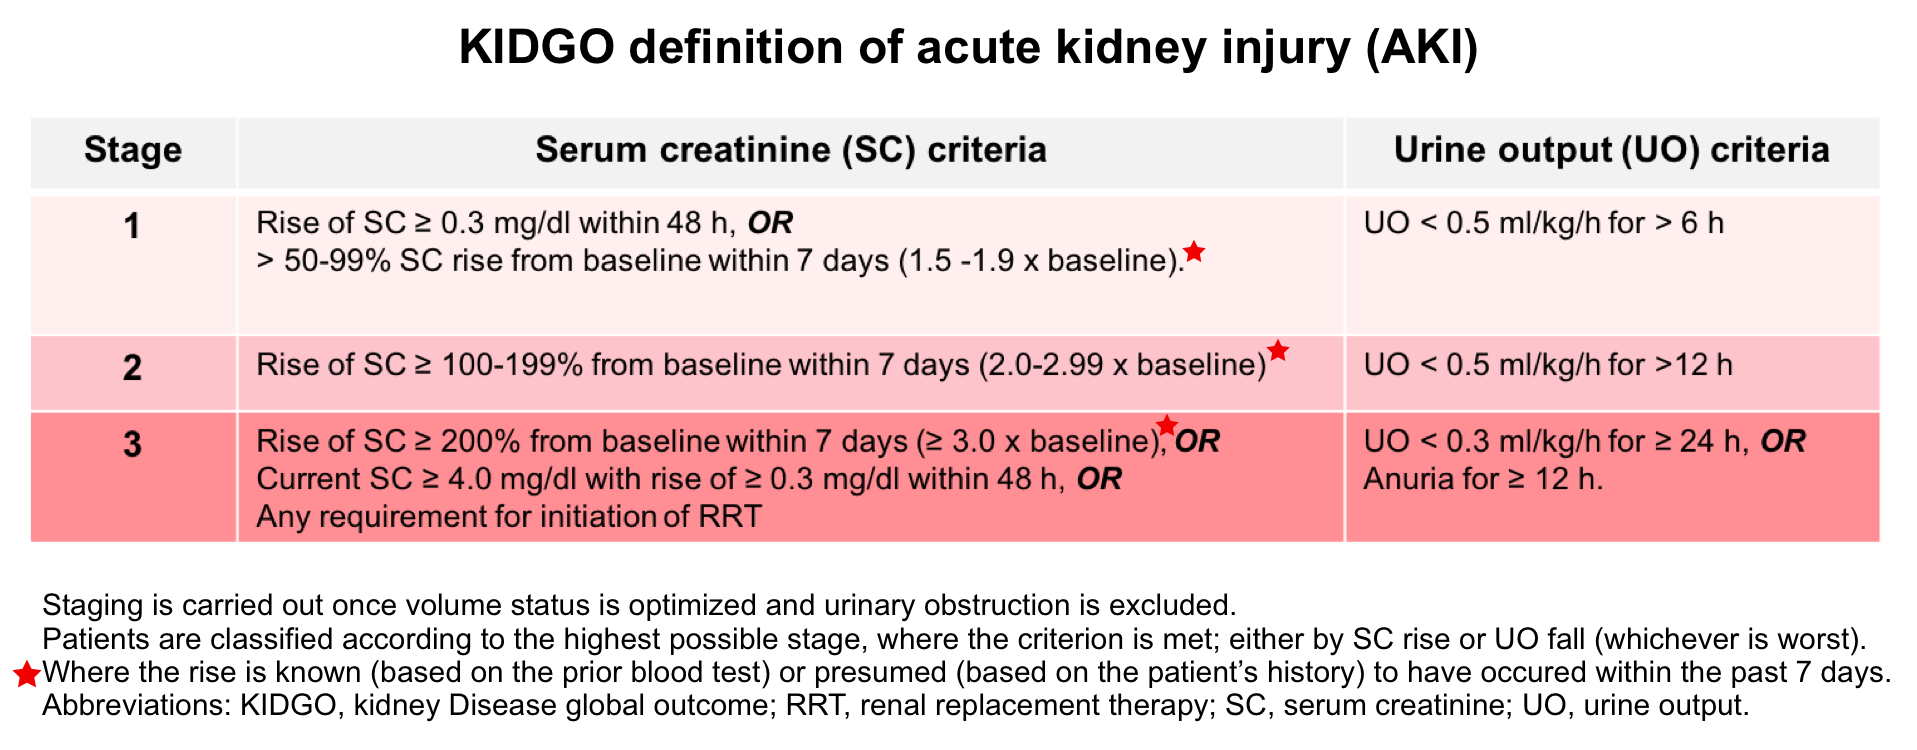 Acute Kidney Injury Principles Of Diagnosis And Renoresuscitation In